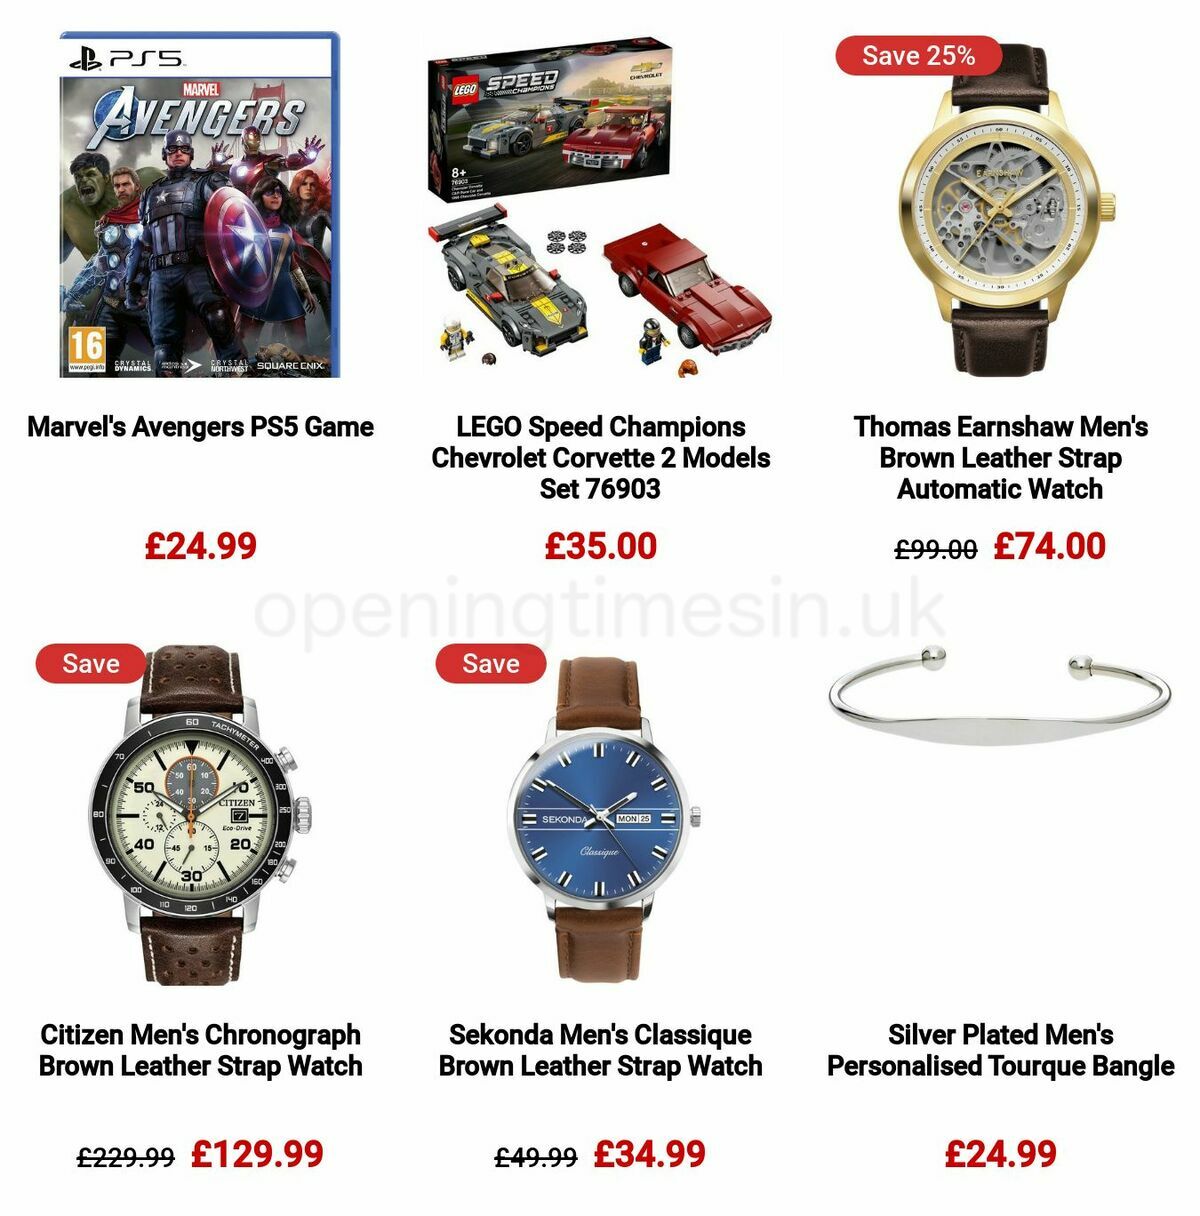 Argos Father's Day Offers from 16 May